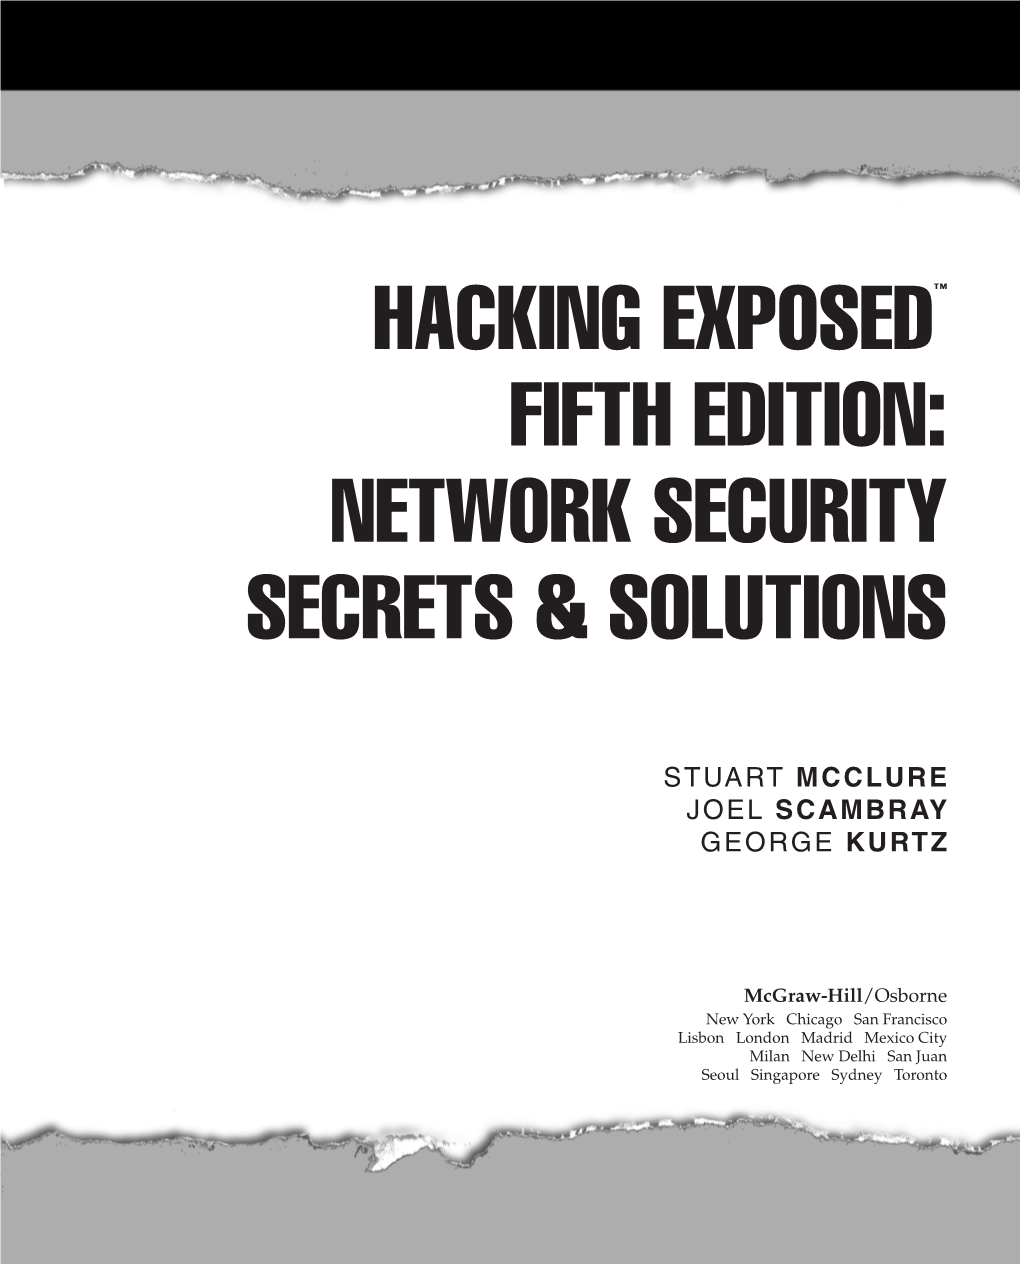 Hacking Exposed™ Fifth Edition: Network Security Secrets & Solutions